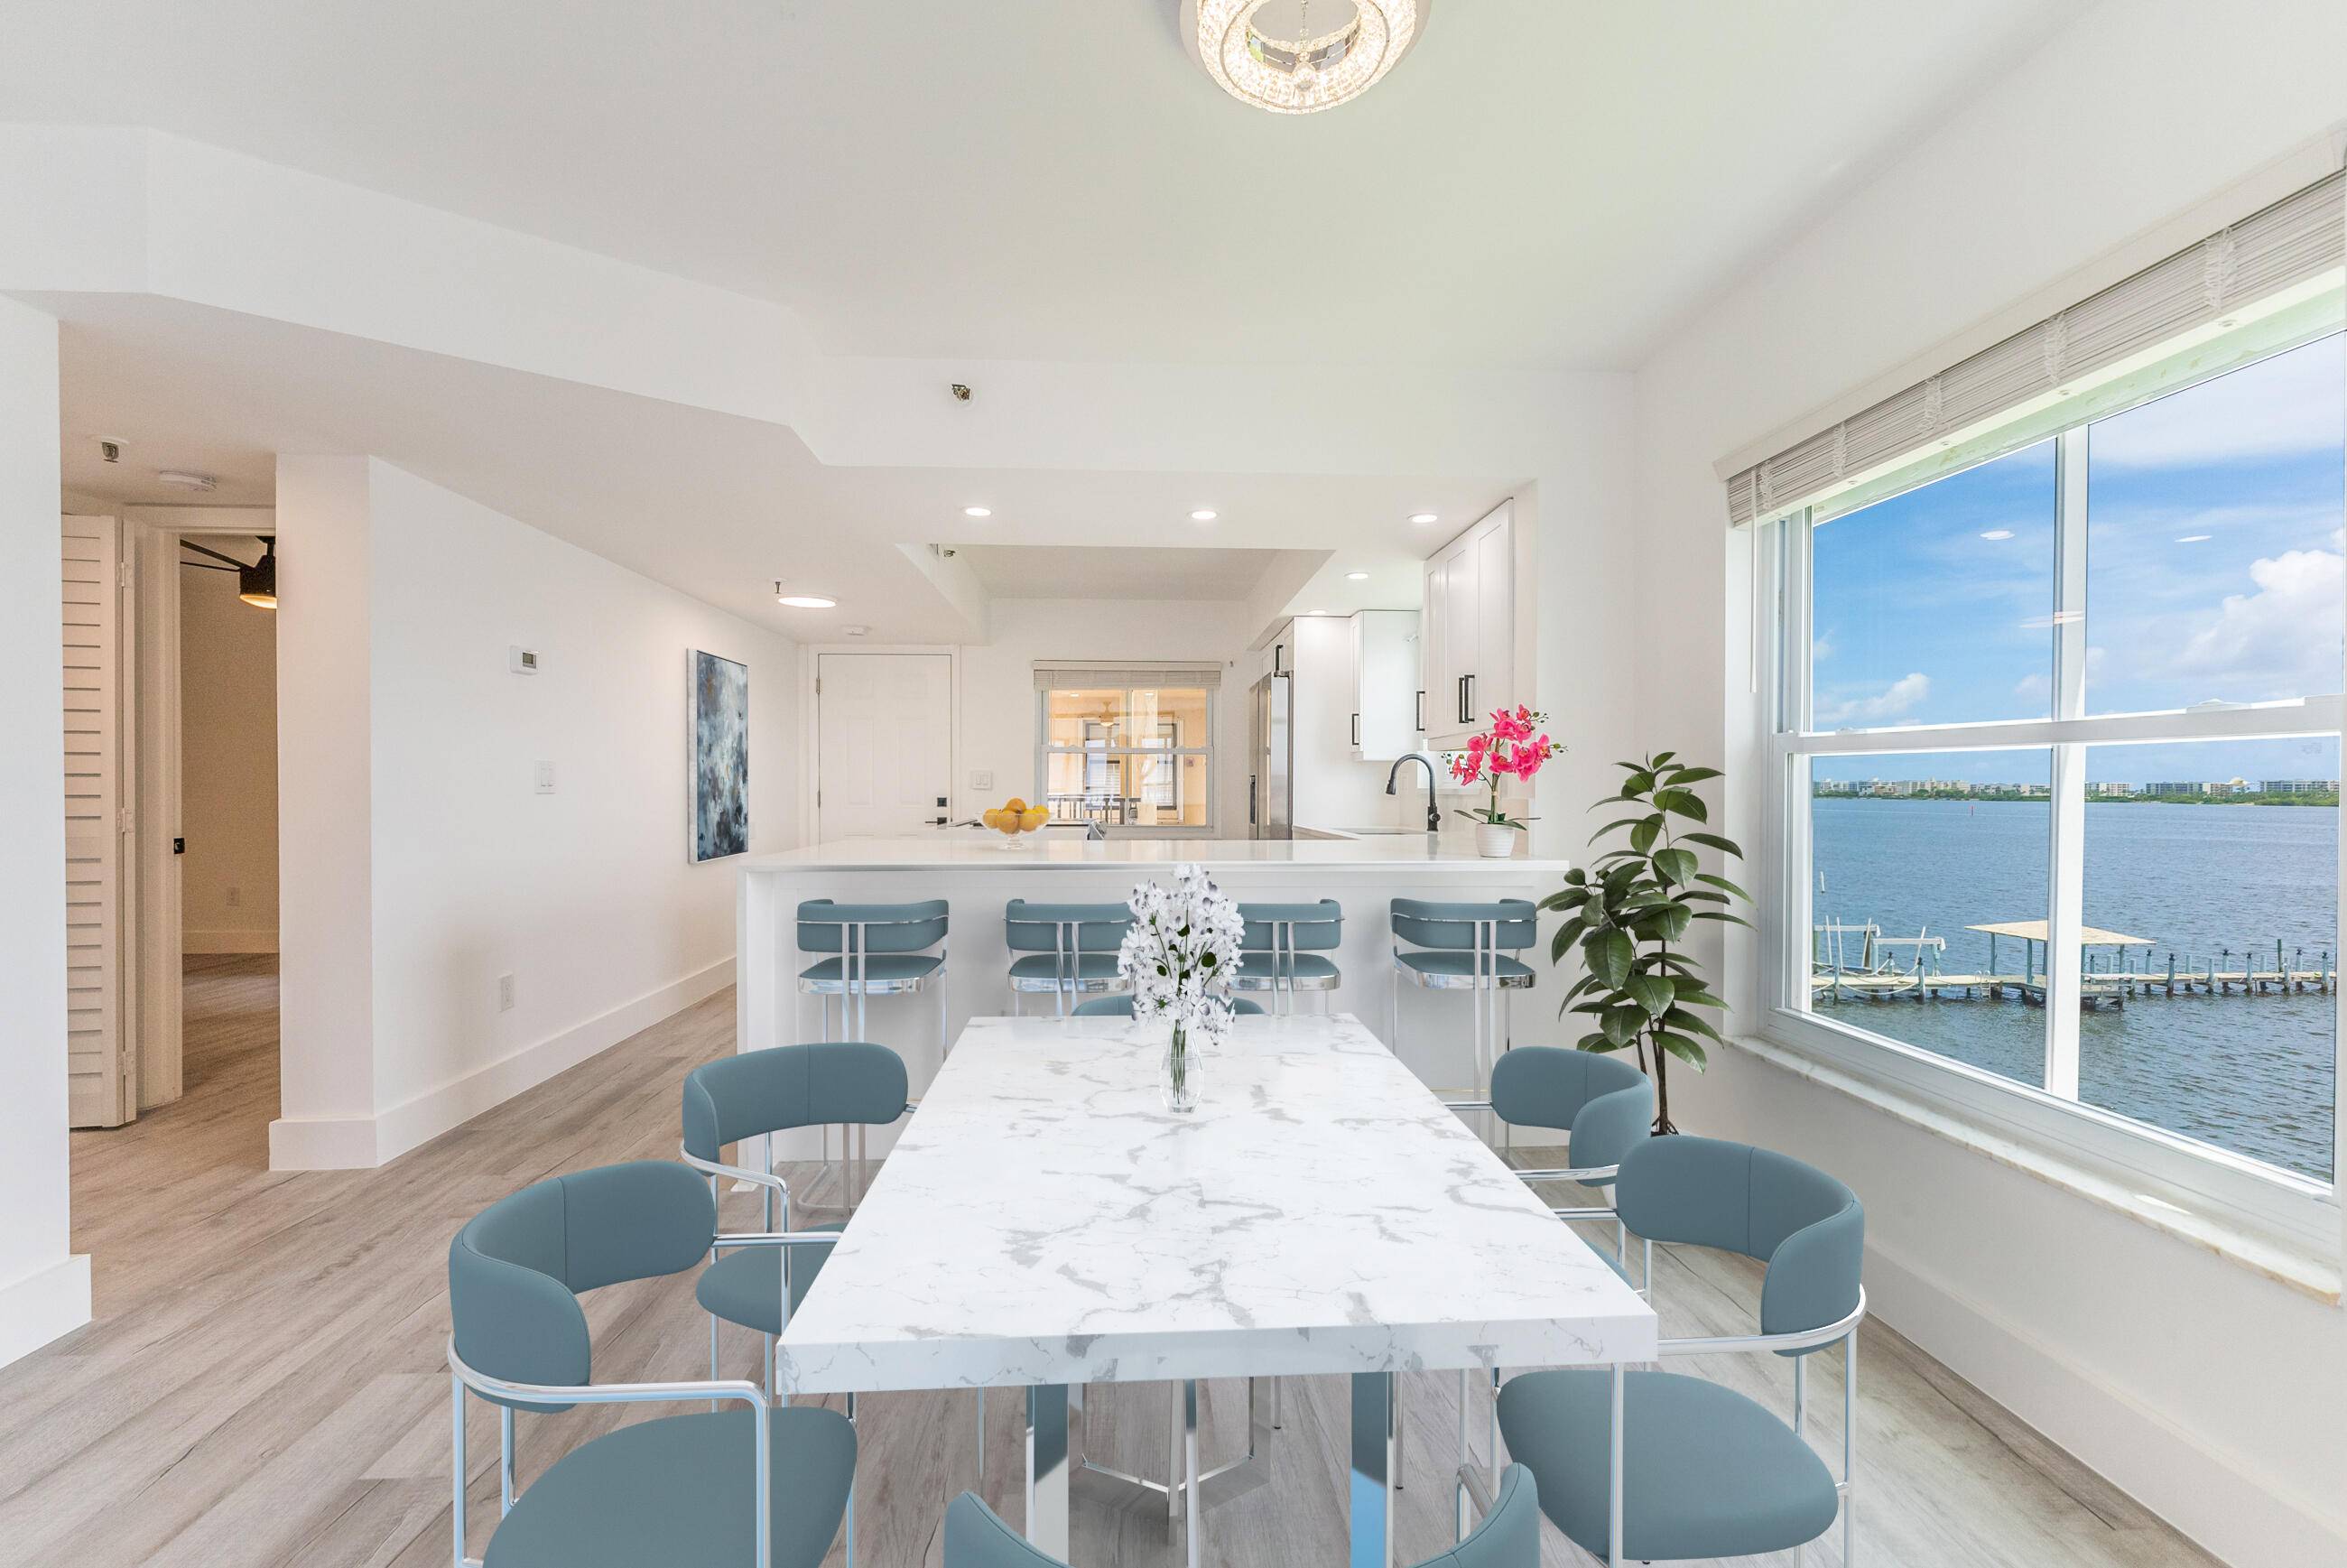 This beautifully remodeled move in ready waterfront condo with amazing views is one you don't want to miss.